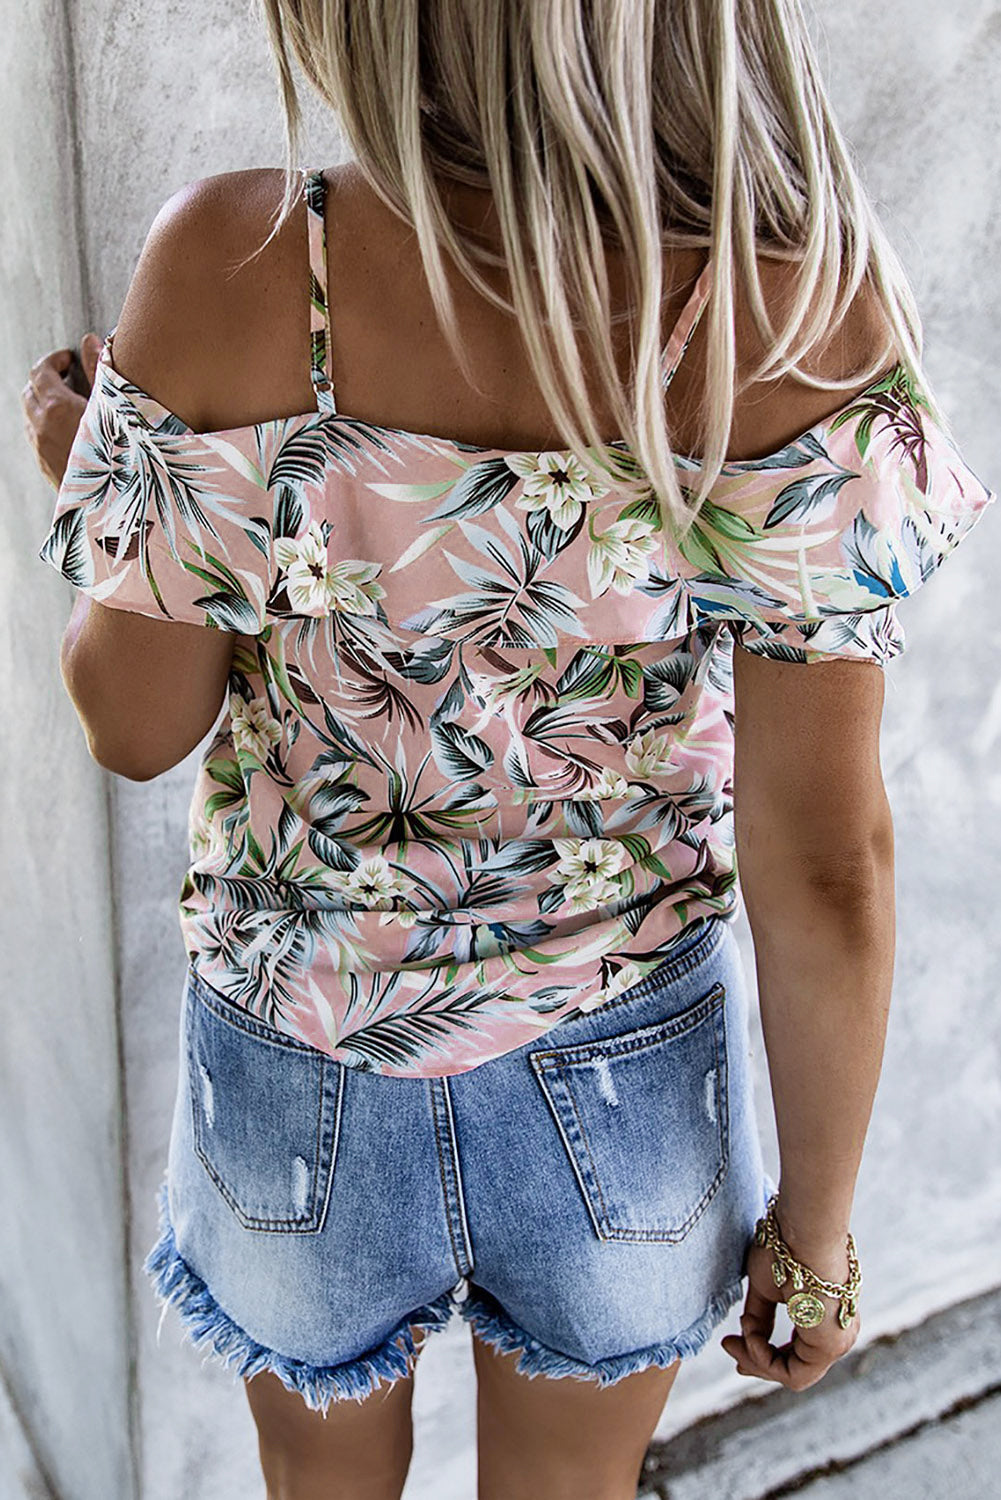 Floral Lace Up Spaghetti Strap Top